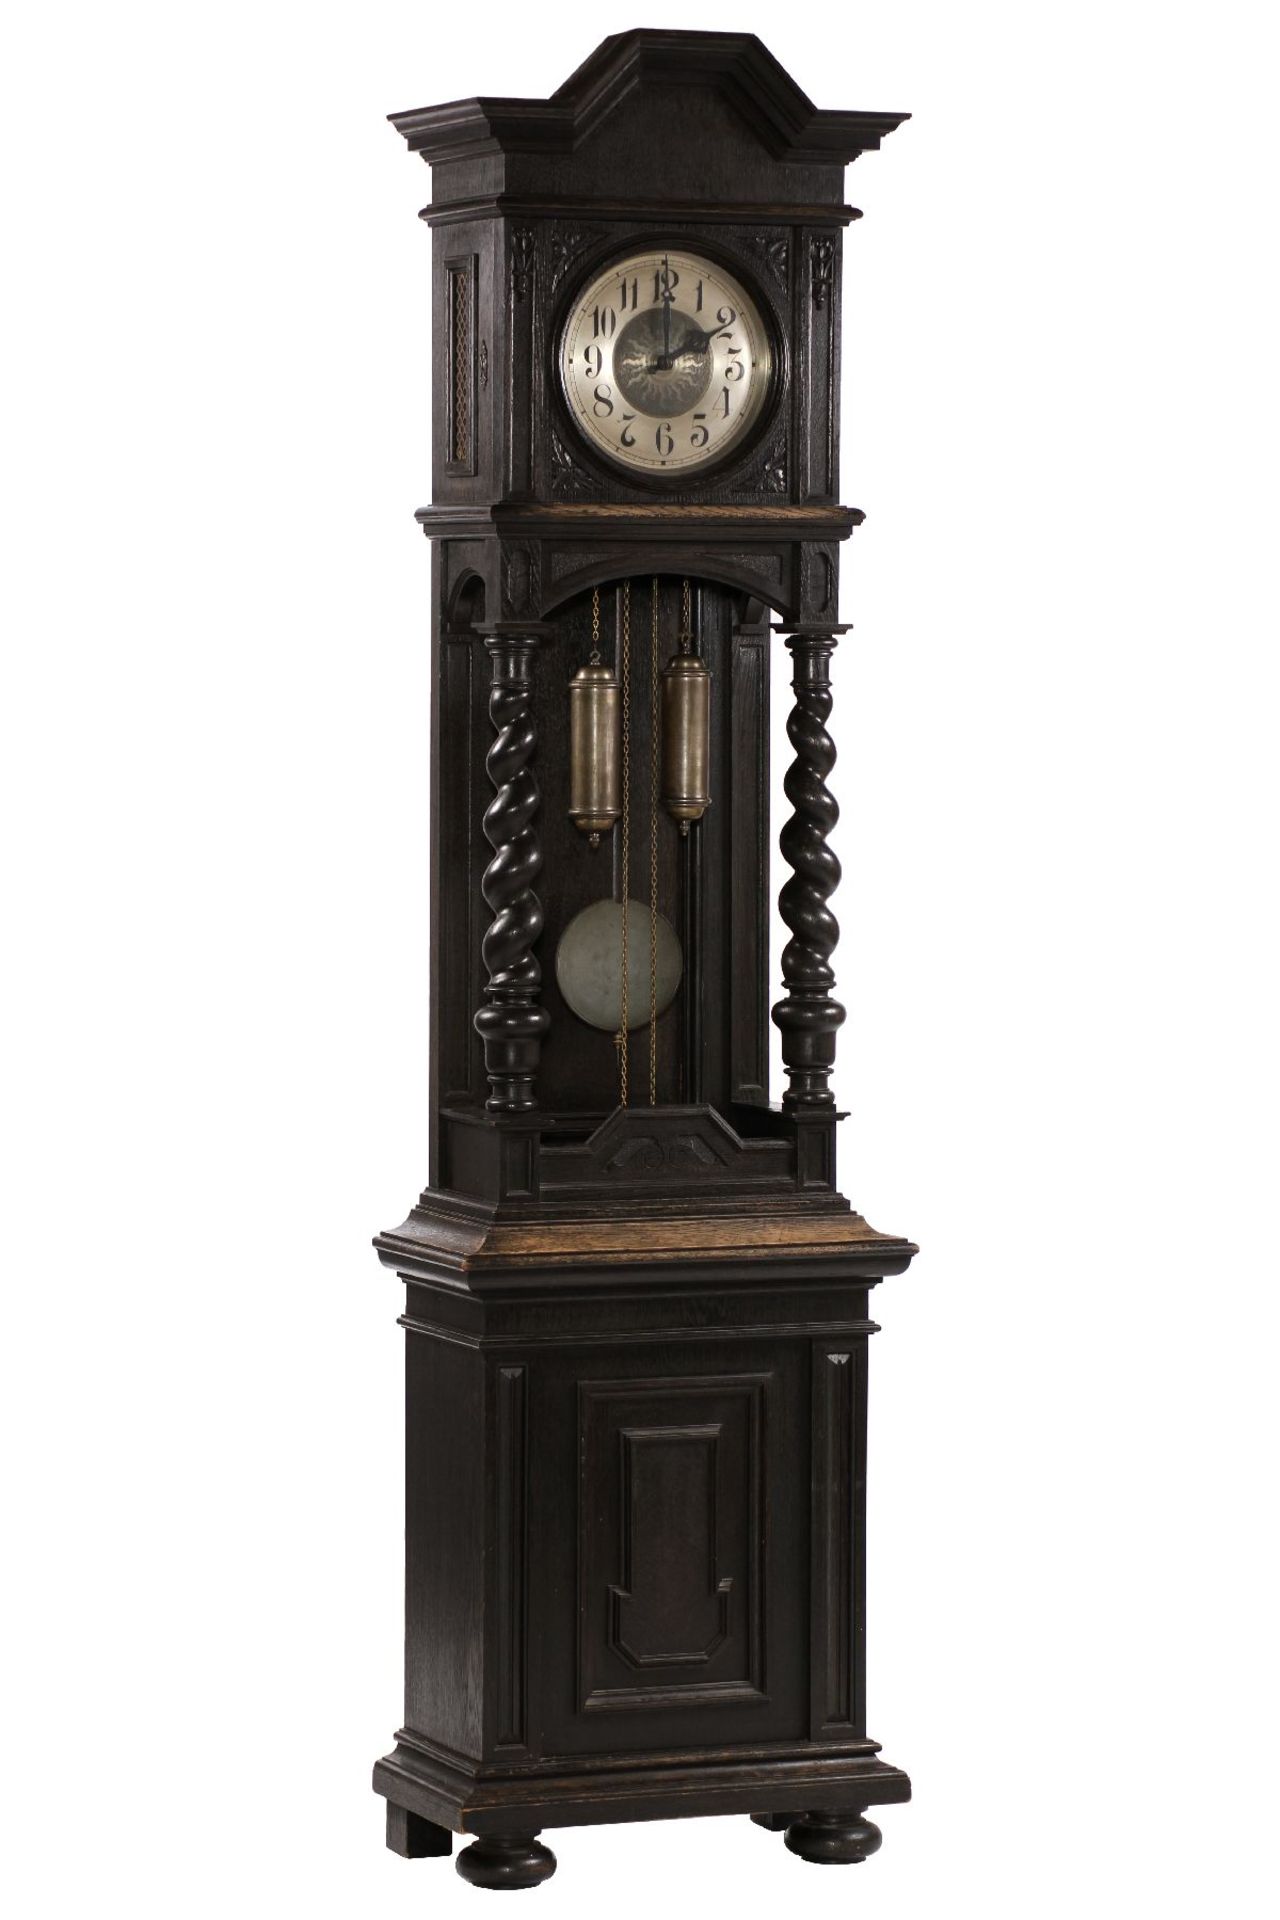 Clock, German, around 1890, so-called Wilhelminian style, solid oak and partly veneered, stained